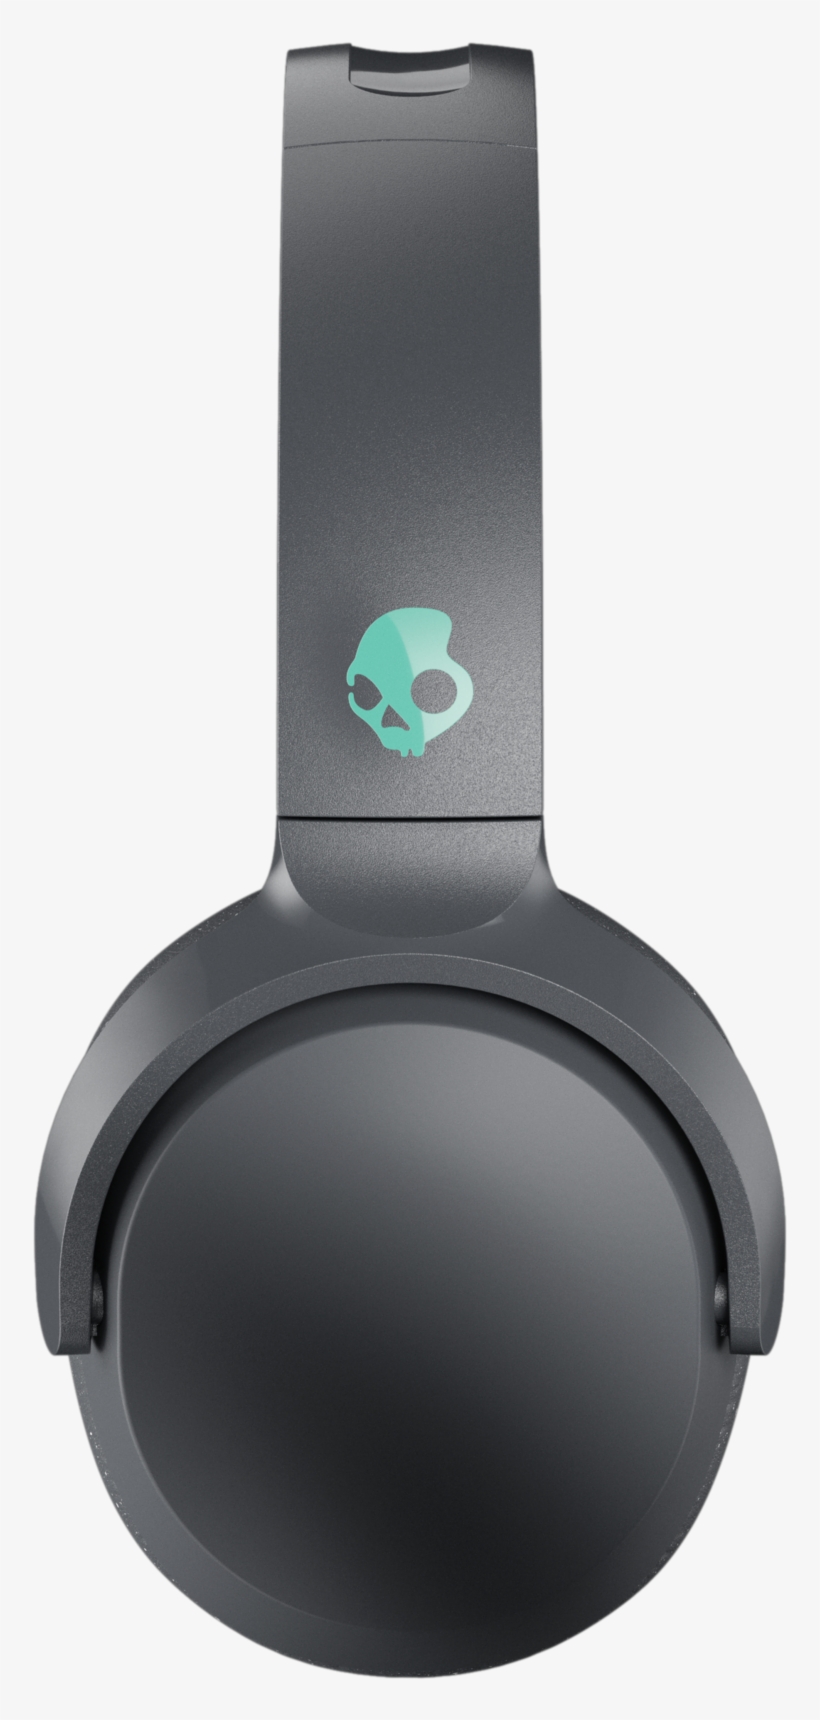 Product View Press Enter To Zoom In And Out - S5pxw L673 Skullcandy, transparent png #9899549